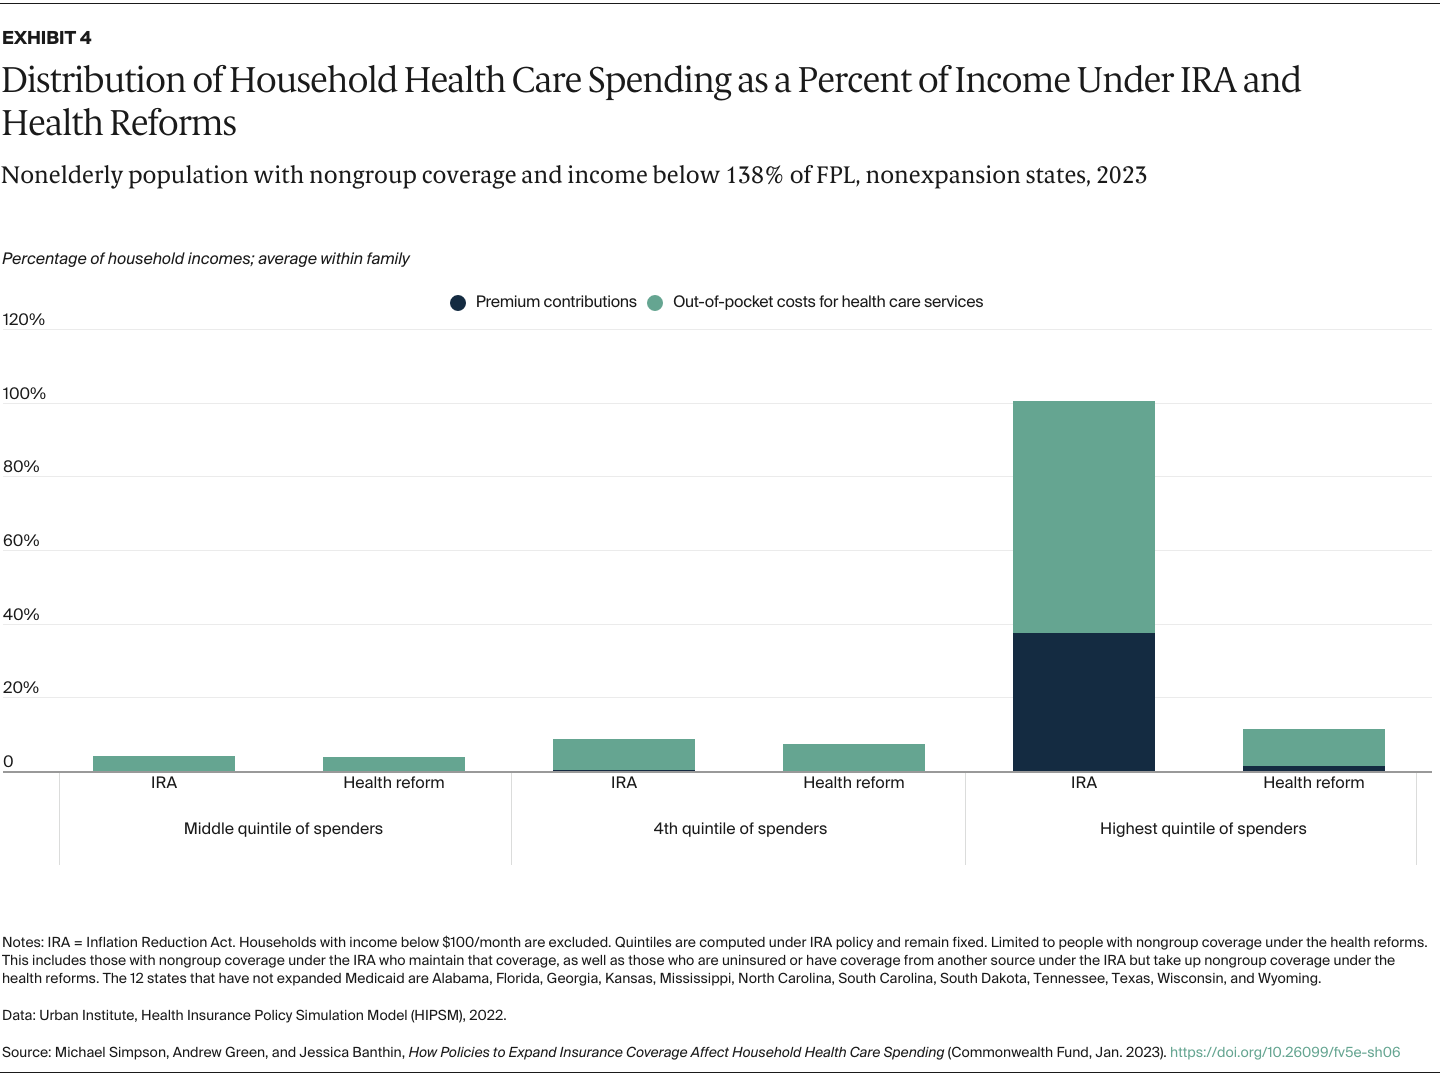 Simpson_policies_expand_coverage_household_spending_Exhibit_04